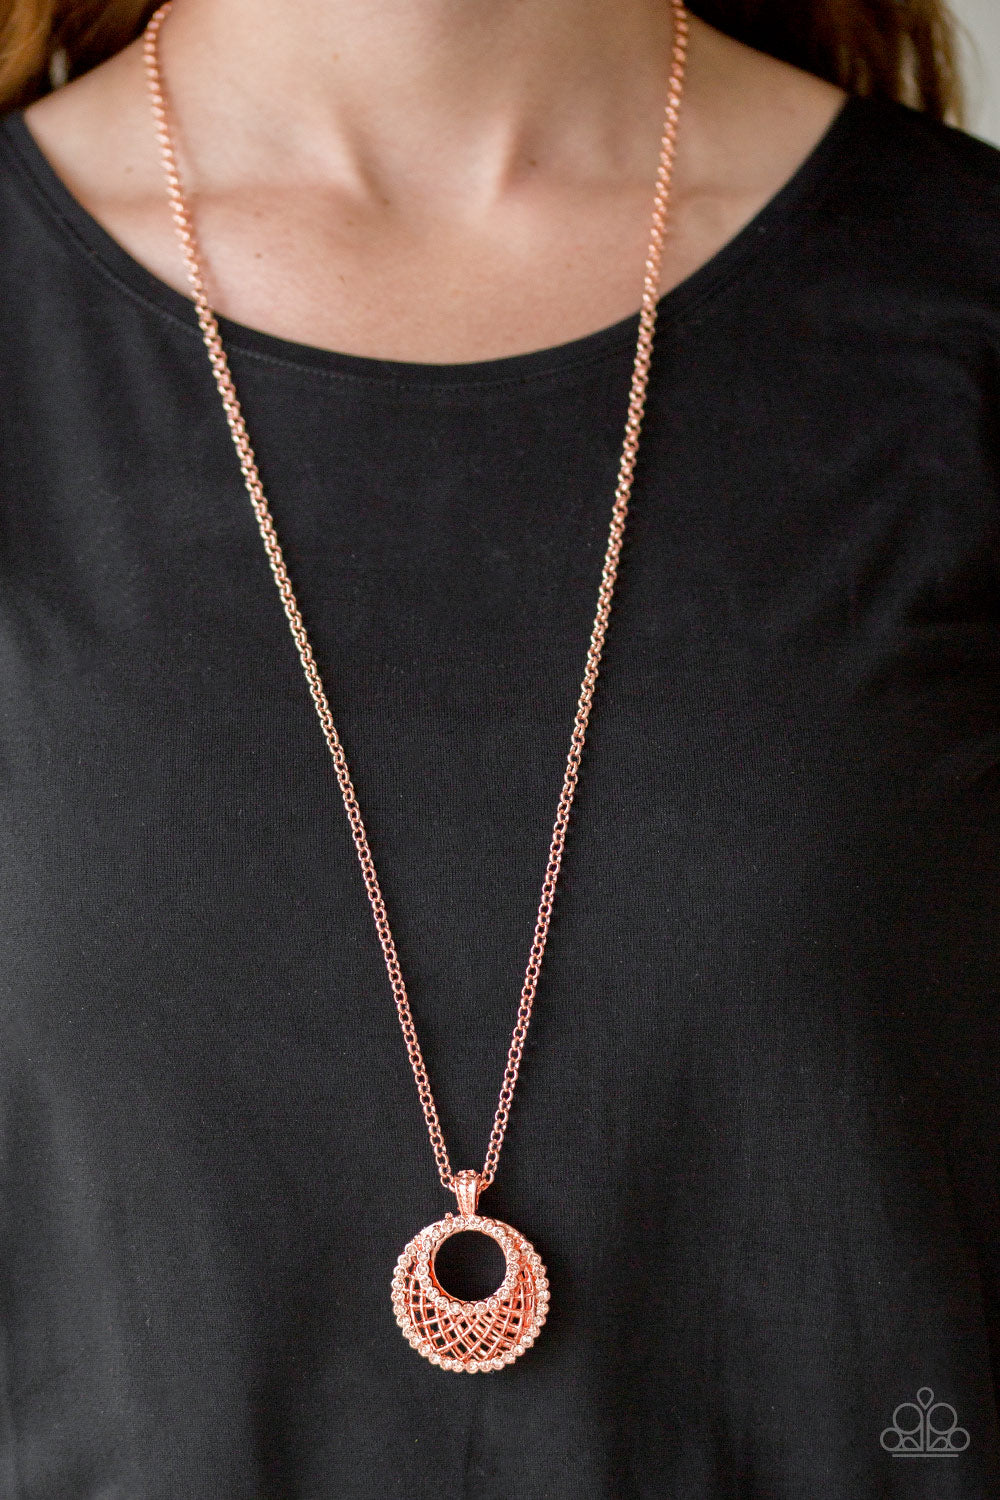 Paparazzi Jewelry & Accessories - Net Worth - Copper Necklace. Bling By Titia Boutique